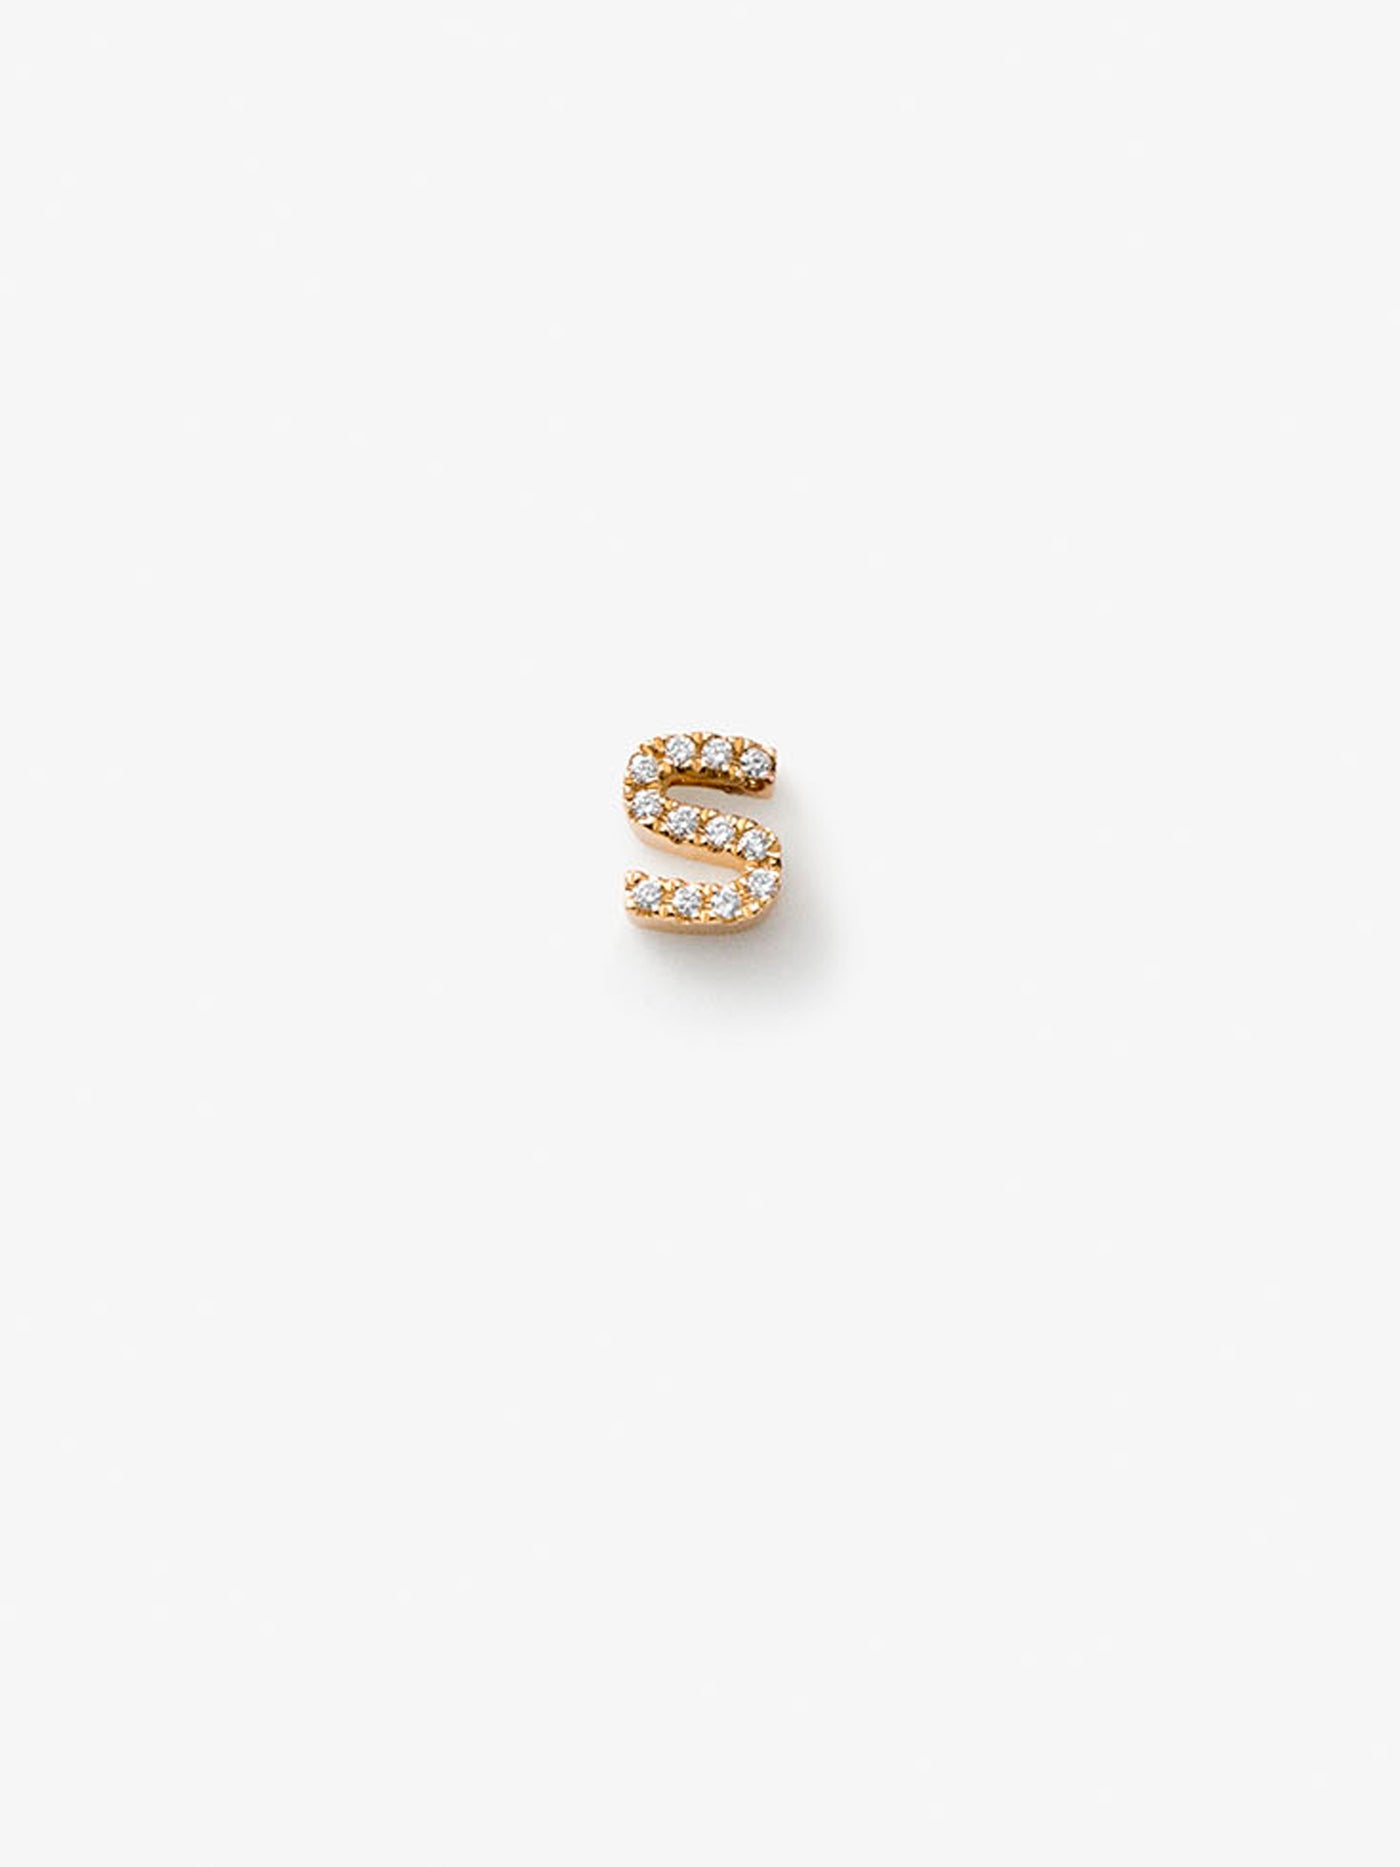 Letter S in Diamonds and 18k Gold